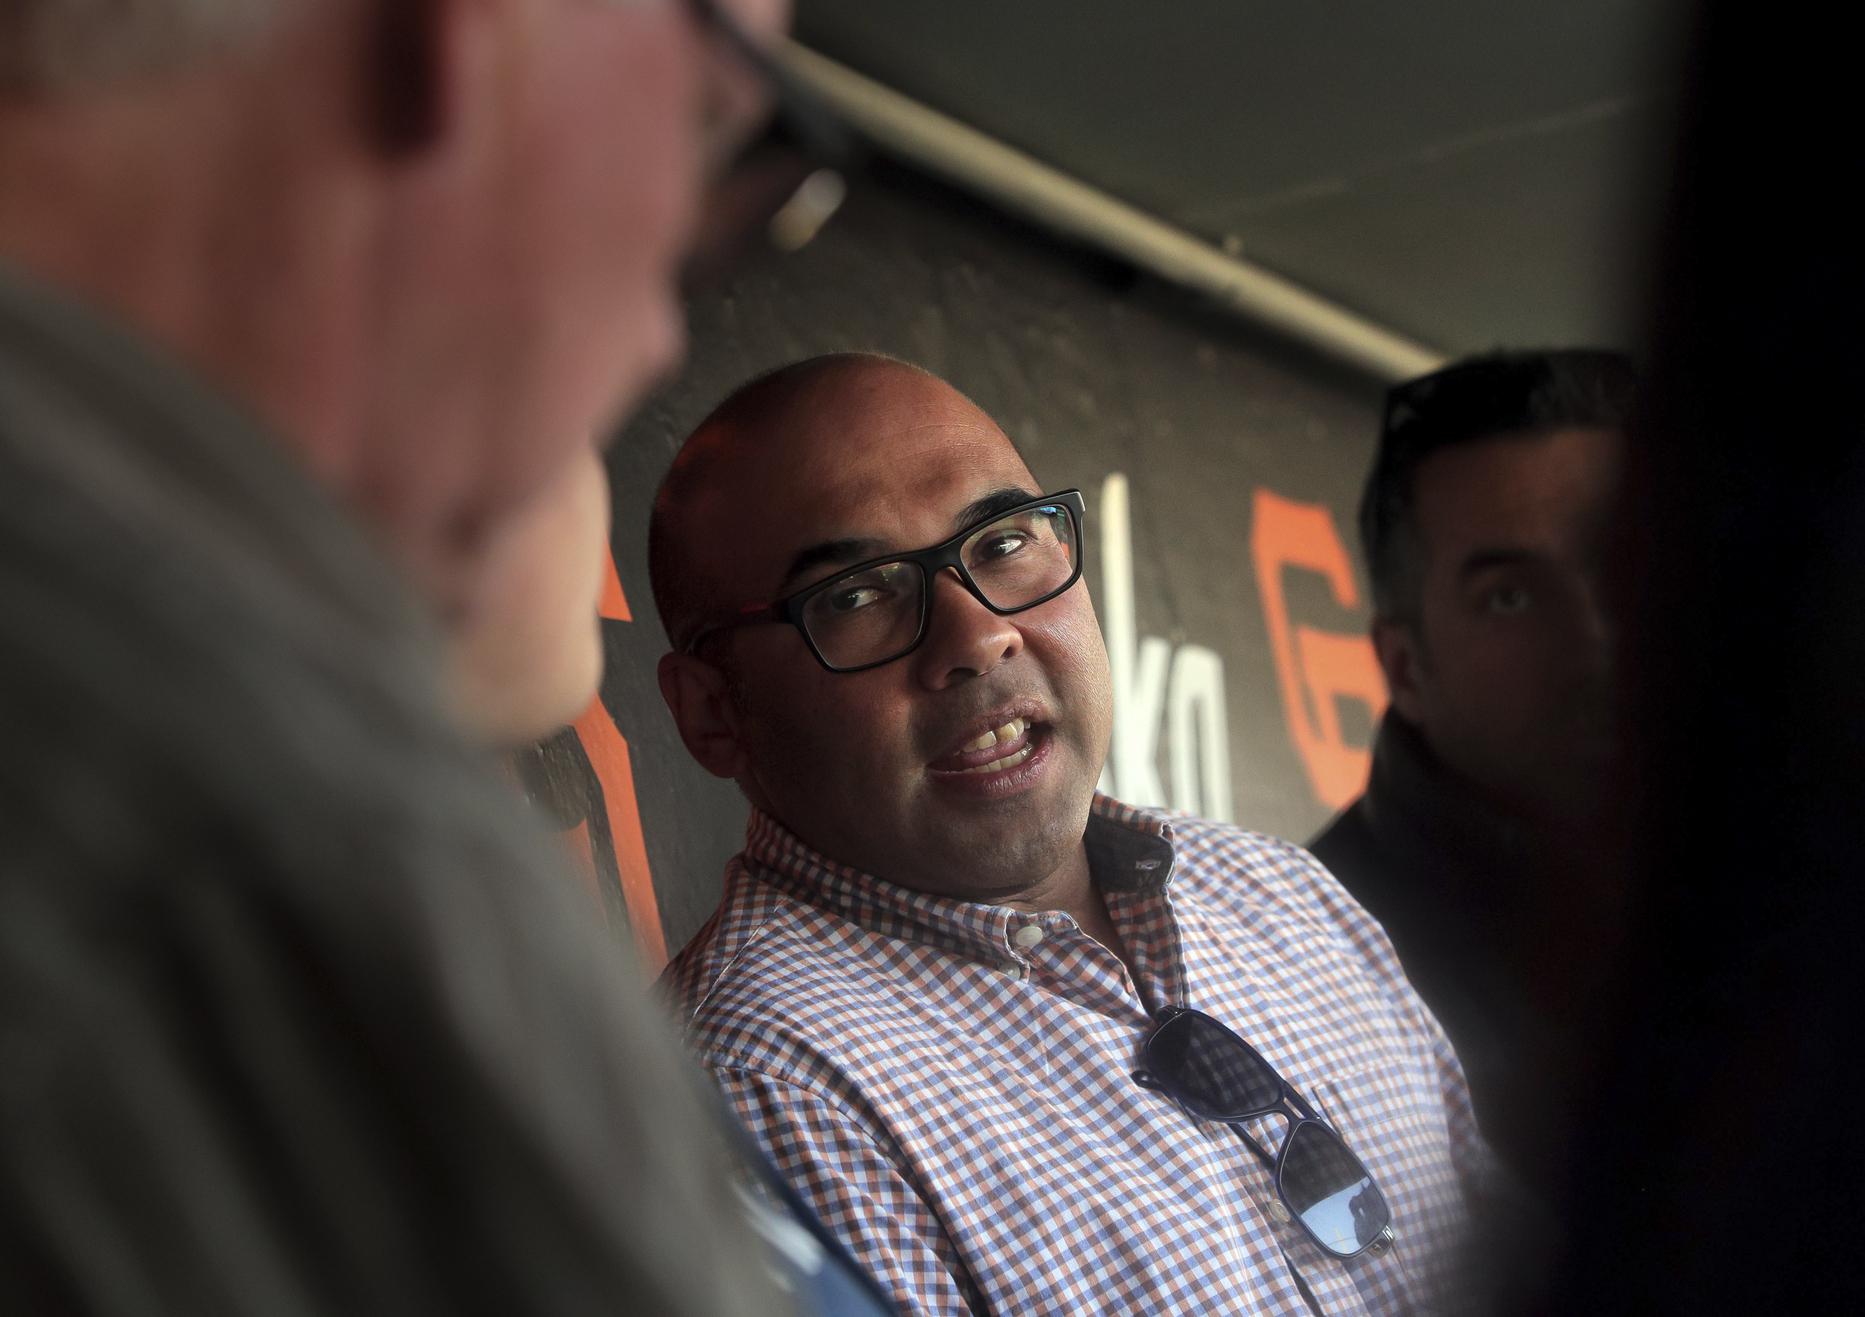 Giants' Zaidi: Adding Gary Sánchez to catching crew had obvious appeal